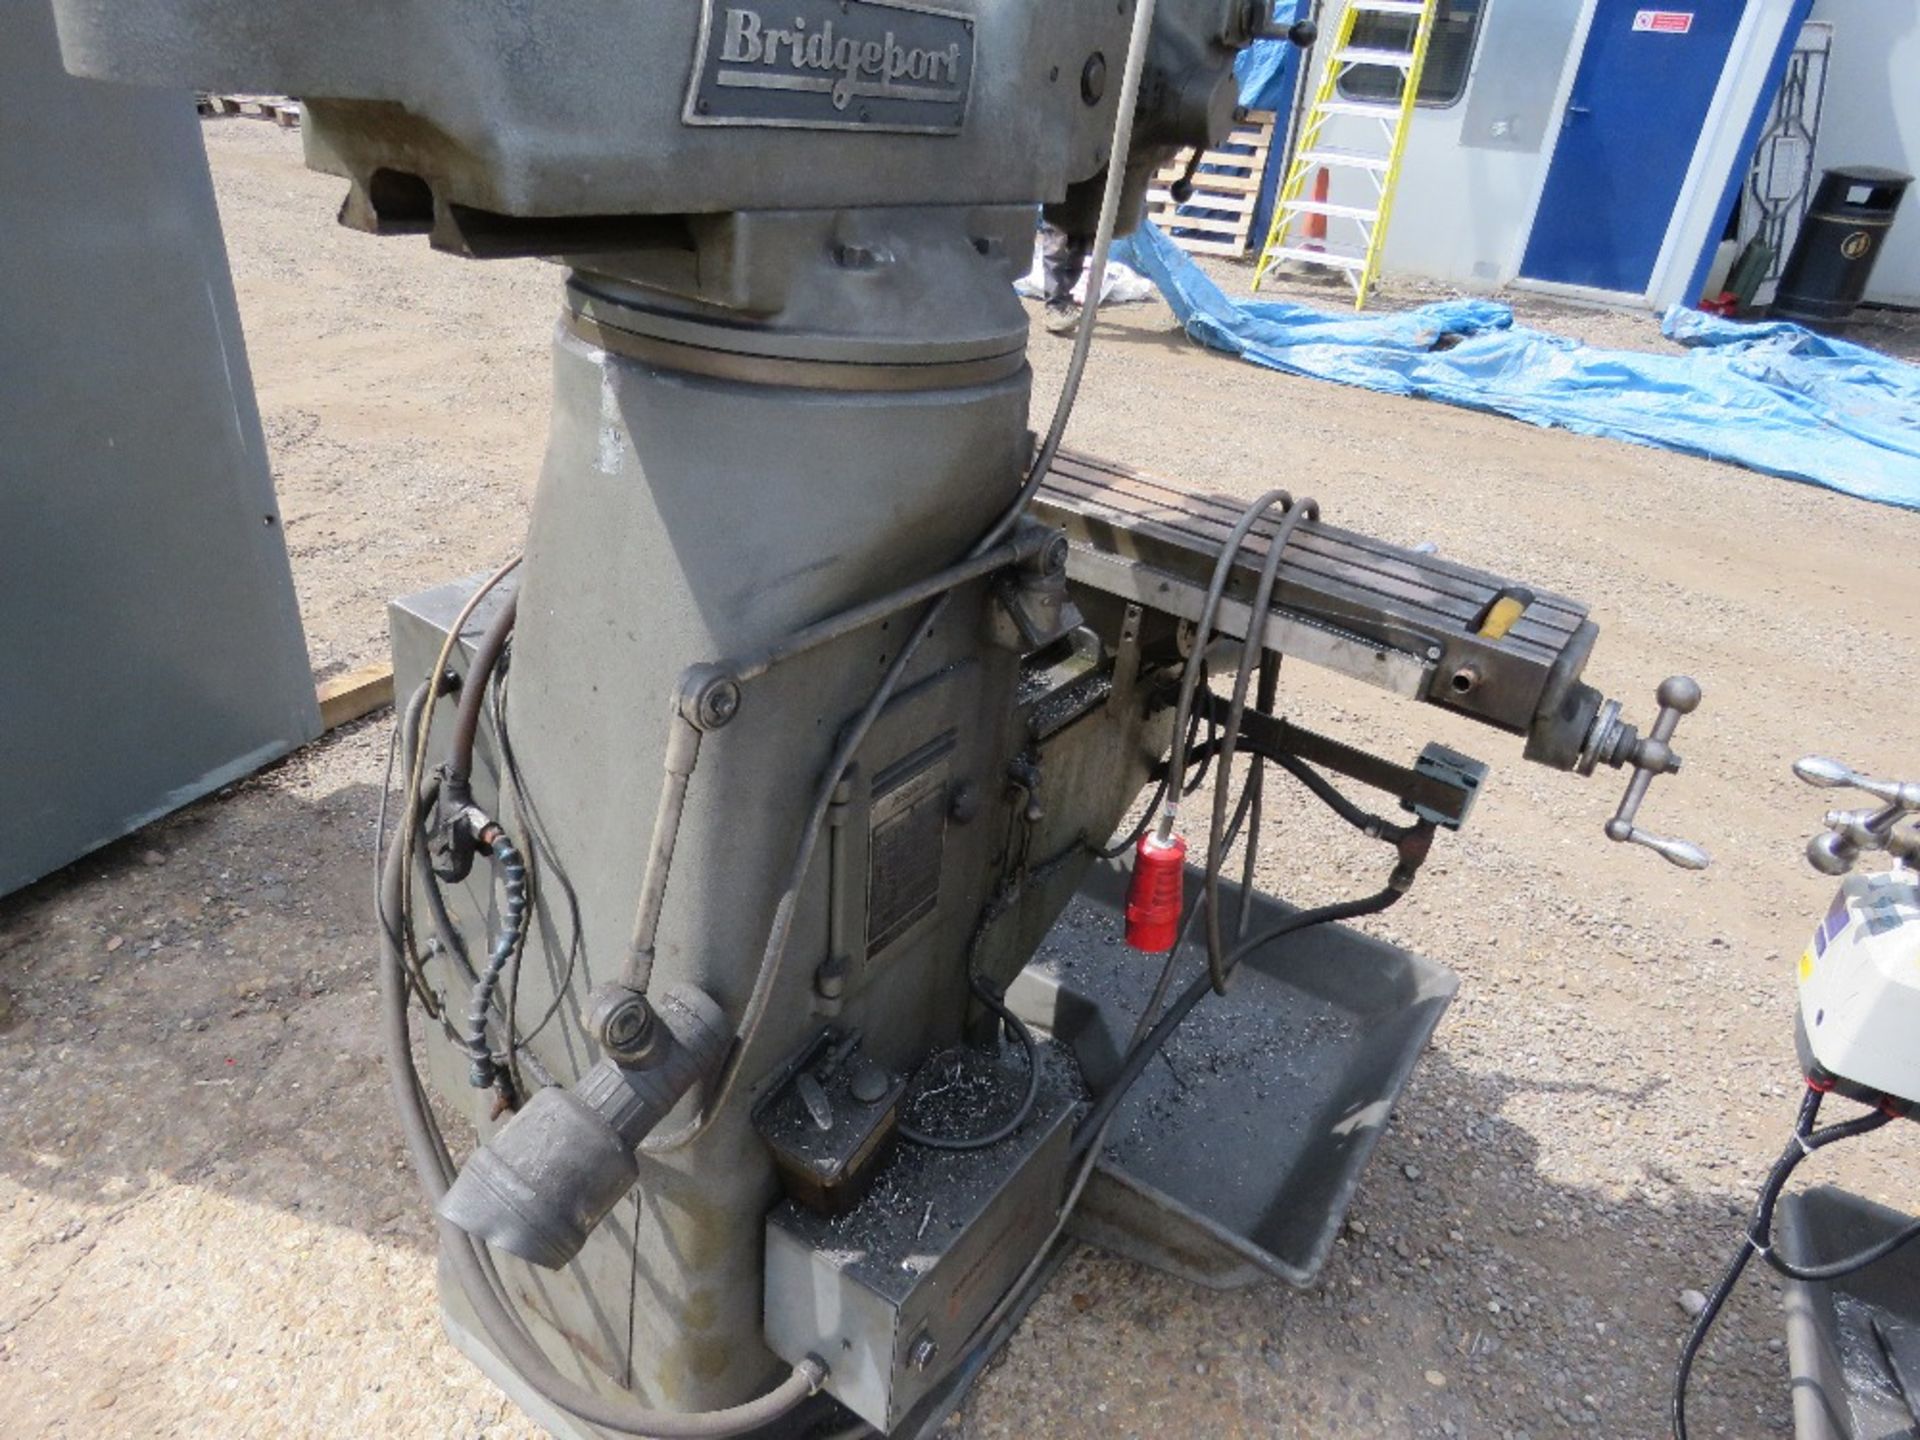 BRIDGEPORT MILLING MACHINE WITH CONTROLLER UNIT AS SHOWN. SOURCED FROM DEPOT CLOSURE. - Image 7 of 12